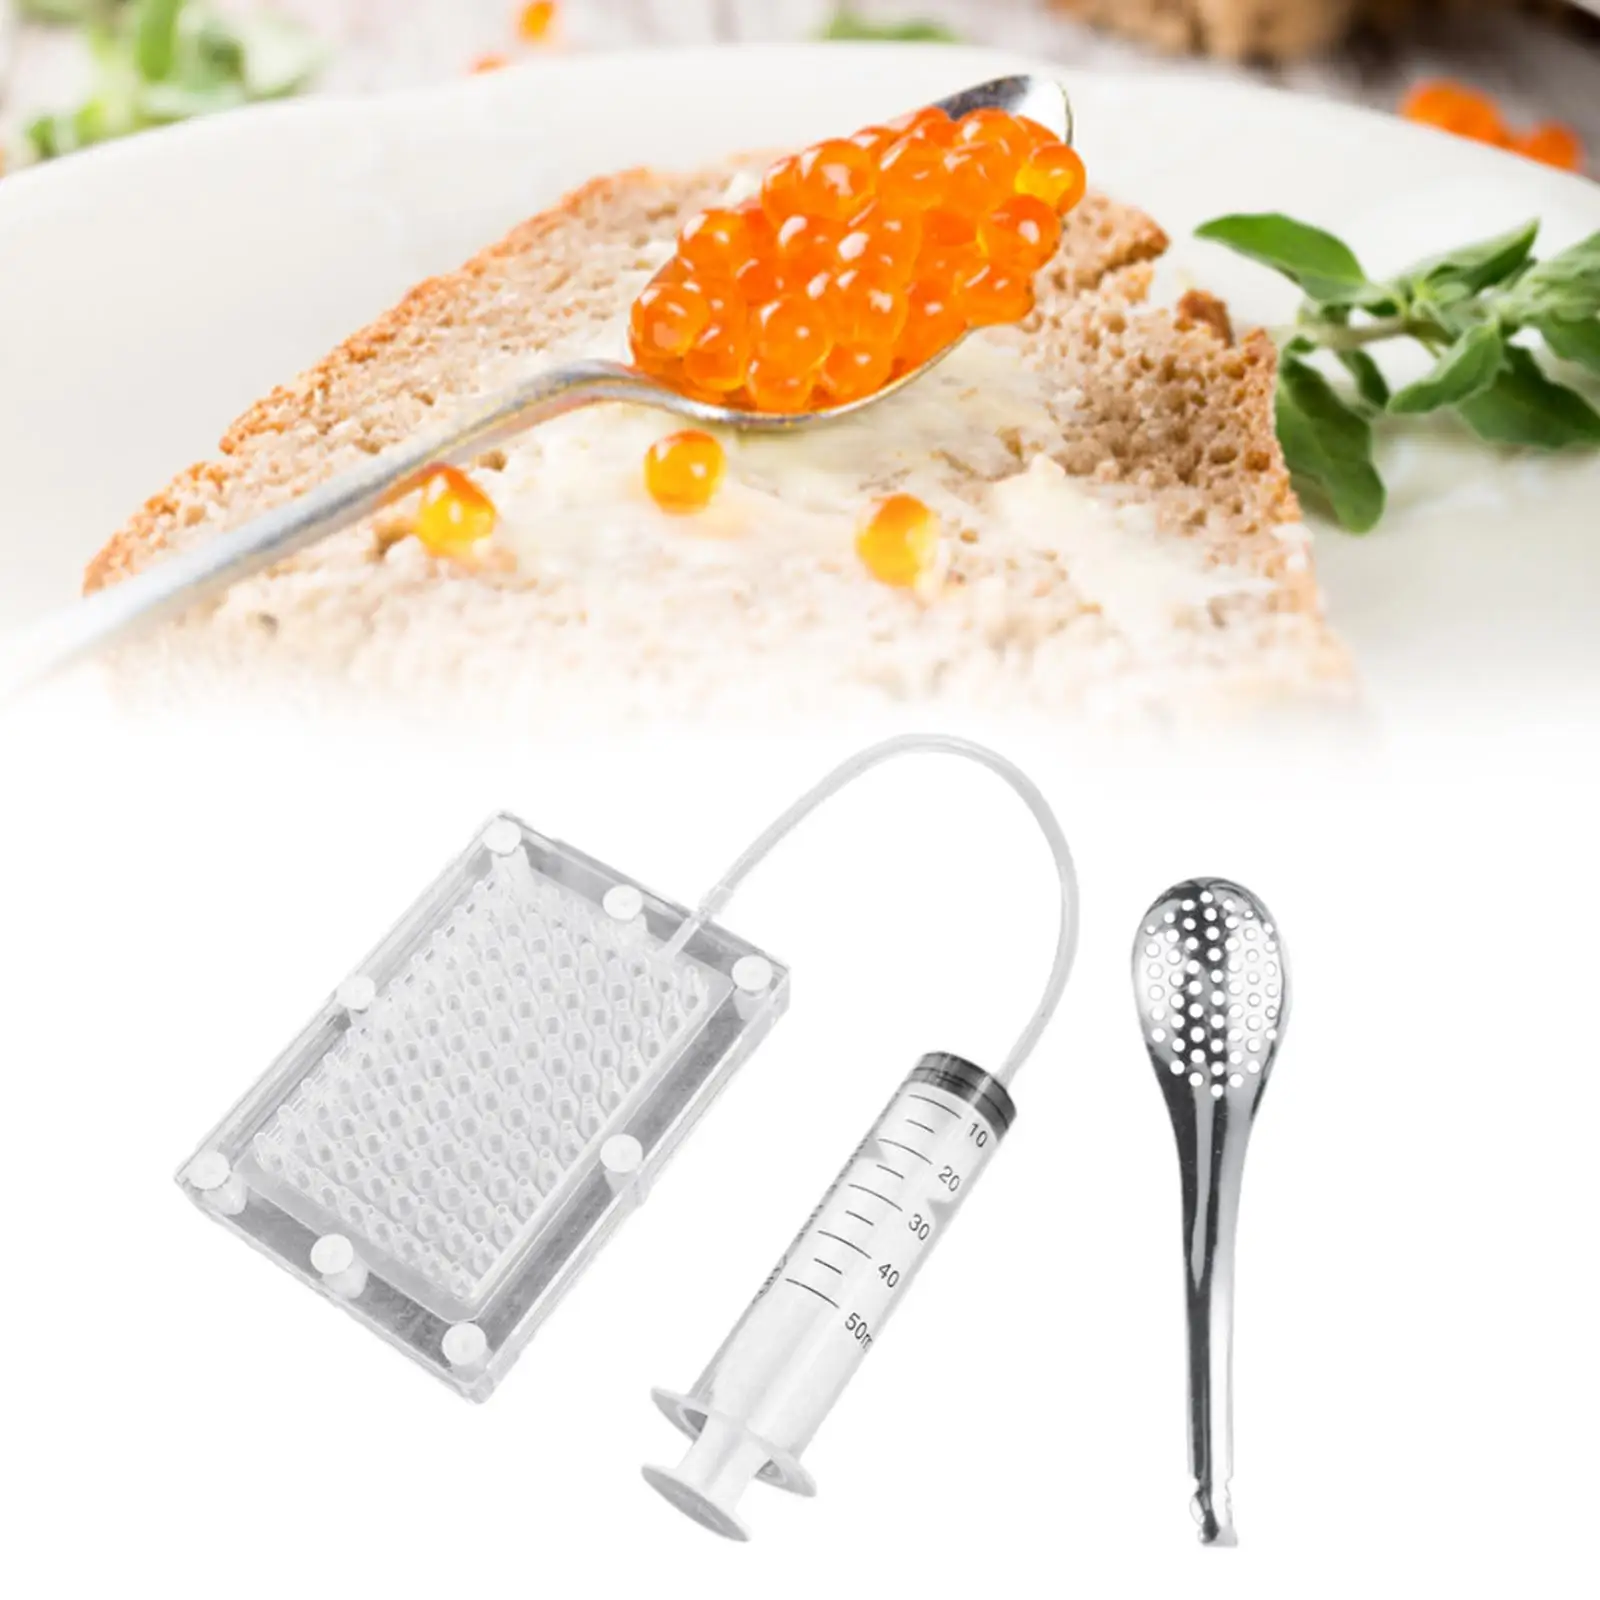  Gastronomy  Maker Gourmet with Tube & Spoon Cuisine Gadgets